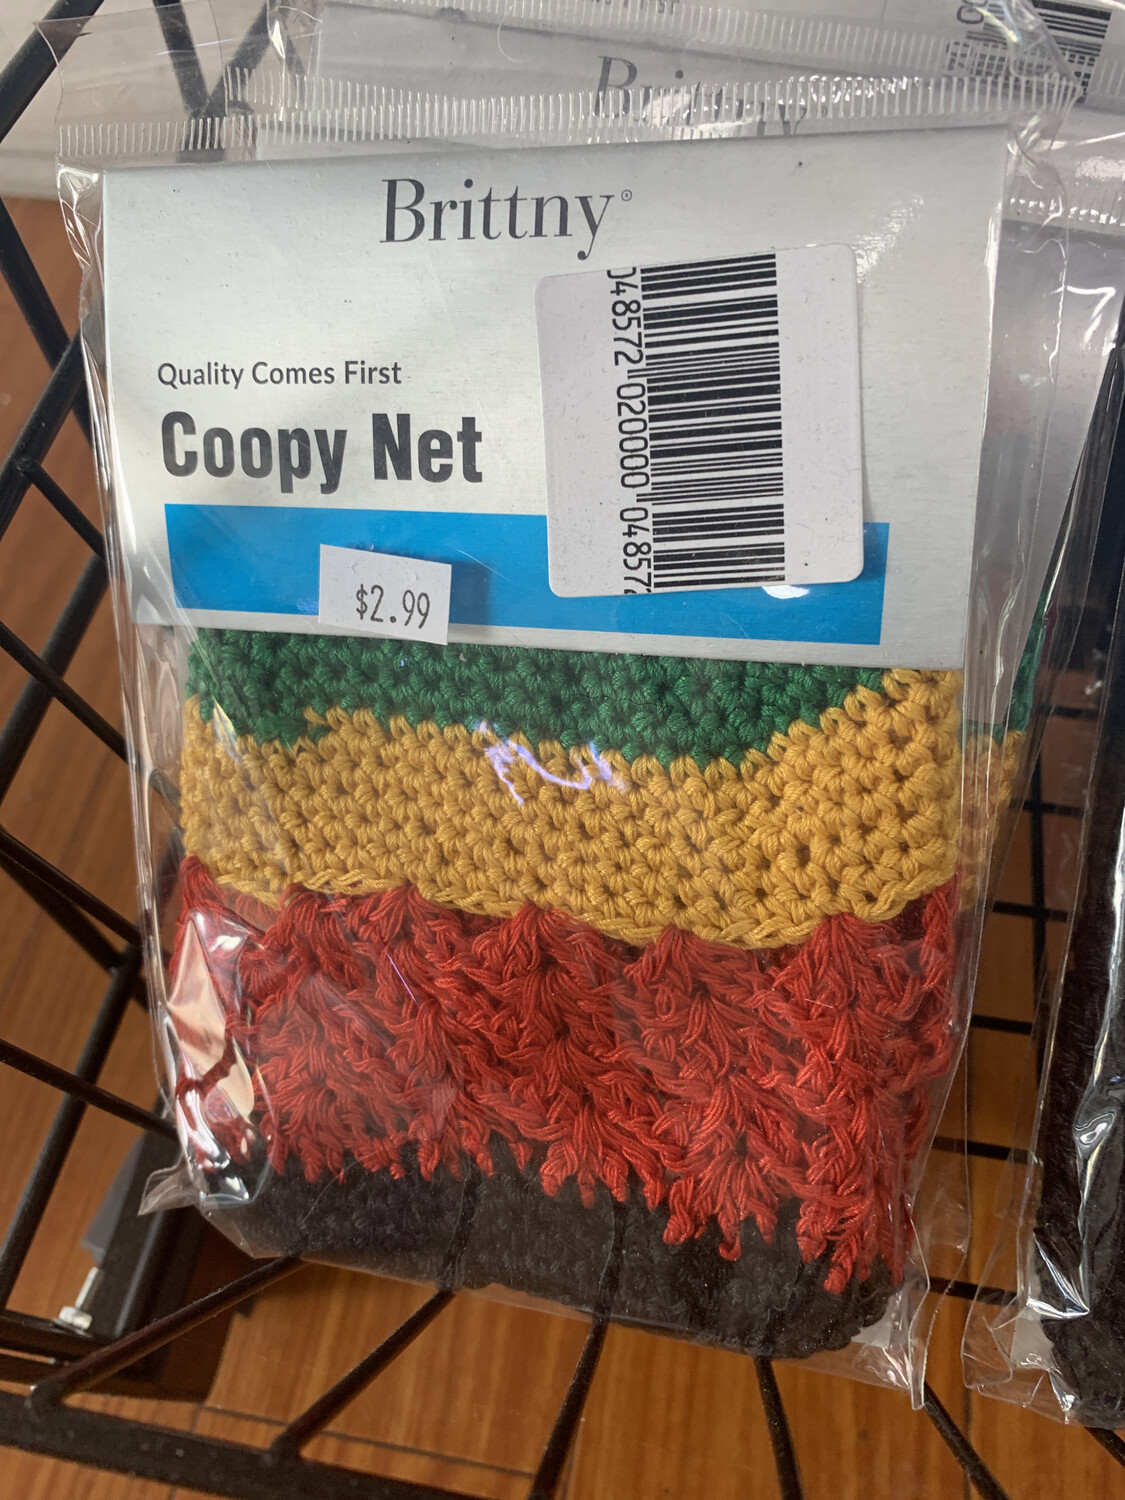 Britty Coopy Net Quality Comes First